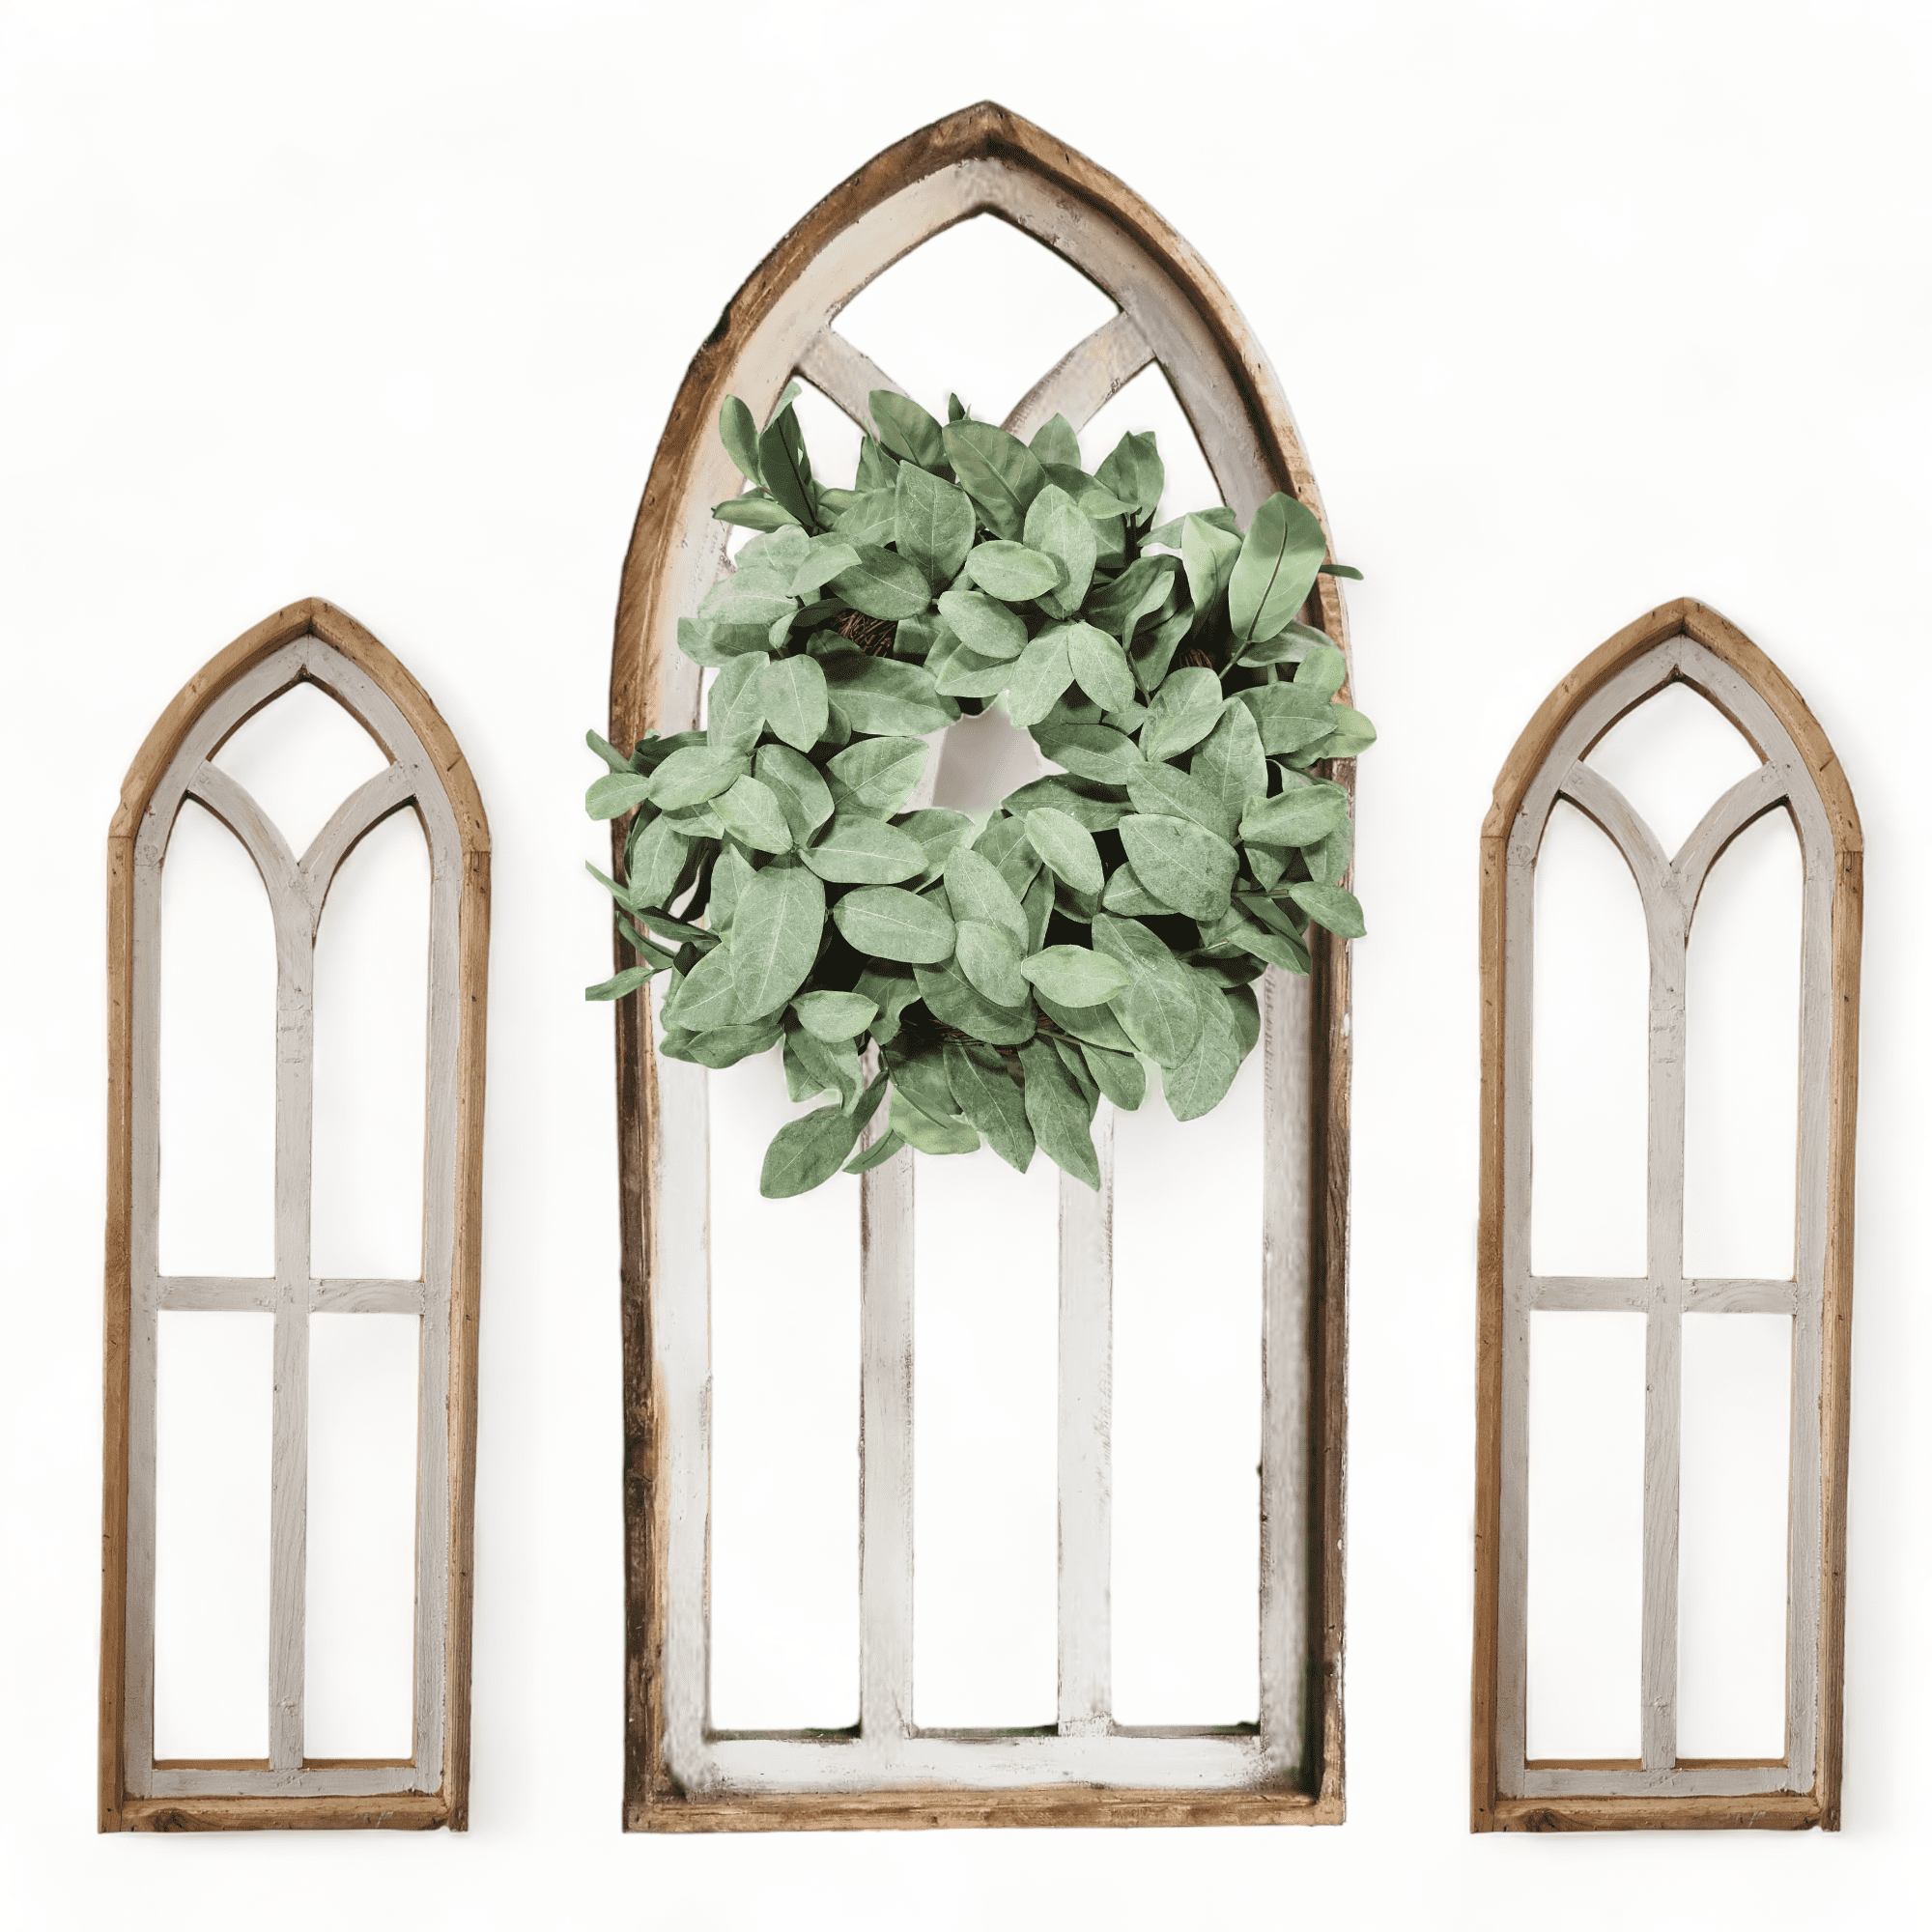 Rustic White Set of 3 Farmhouse Wooden Cathedral Window Arches- The Farmhouse Cathedral Collection Rustic White + Wreaths - Ranch Junkie Mercantile LLC